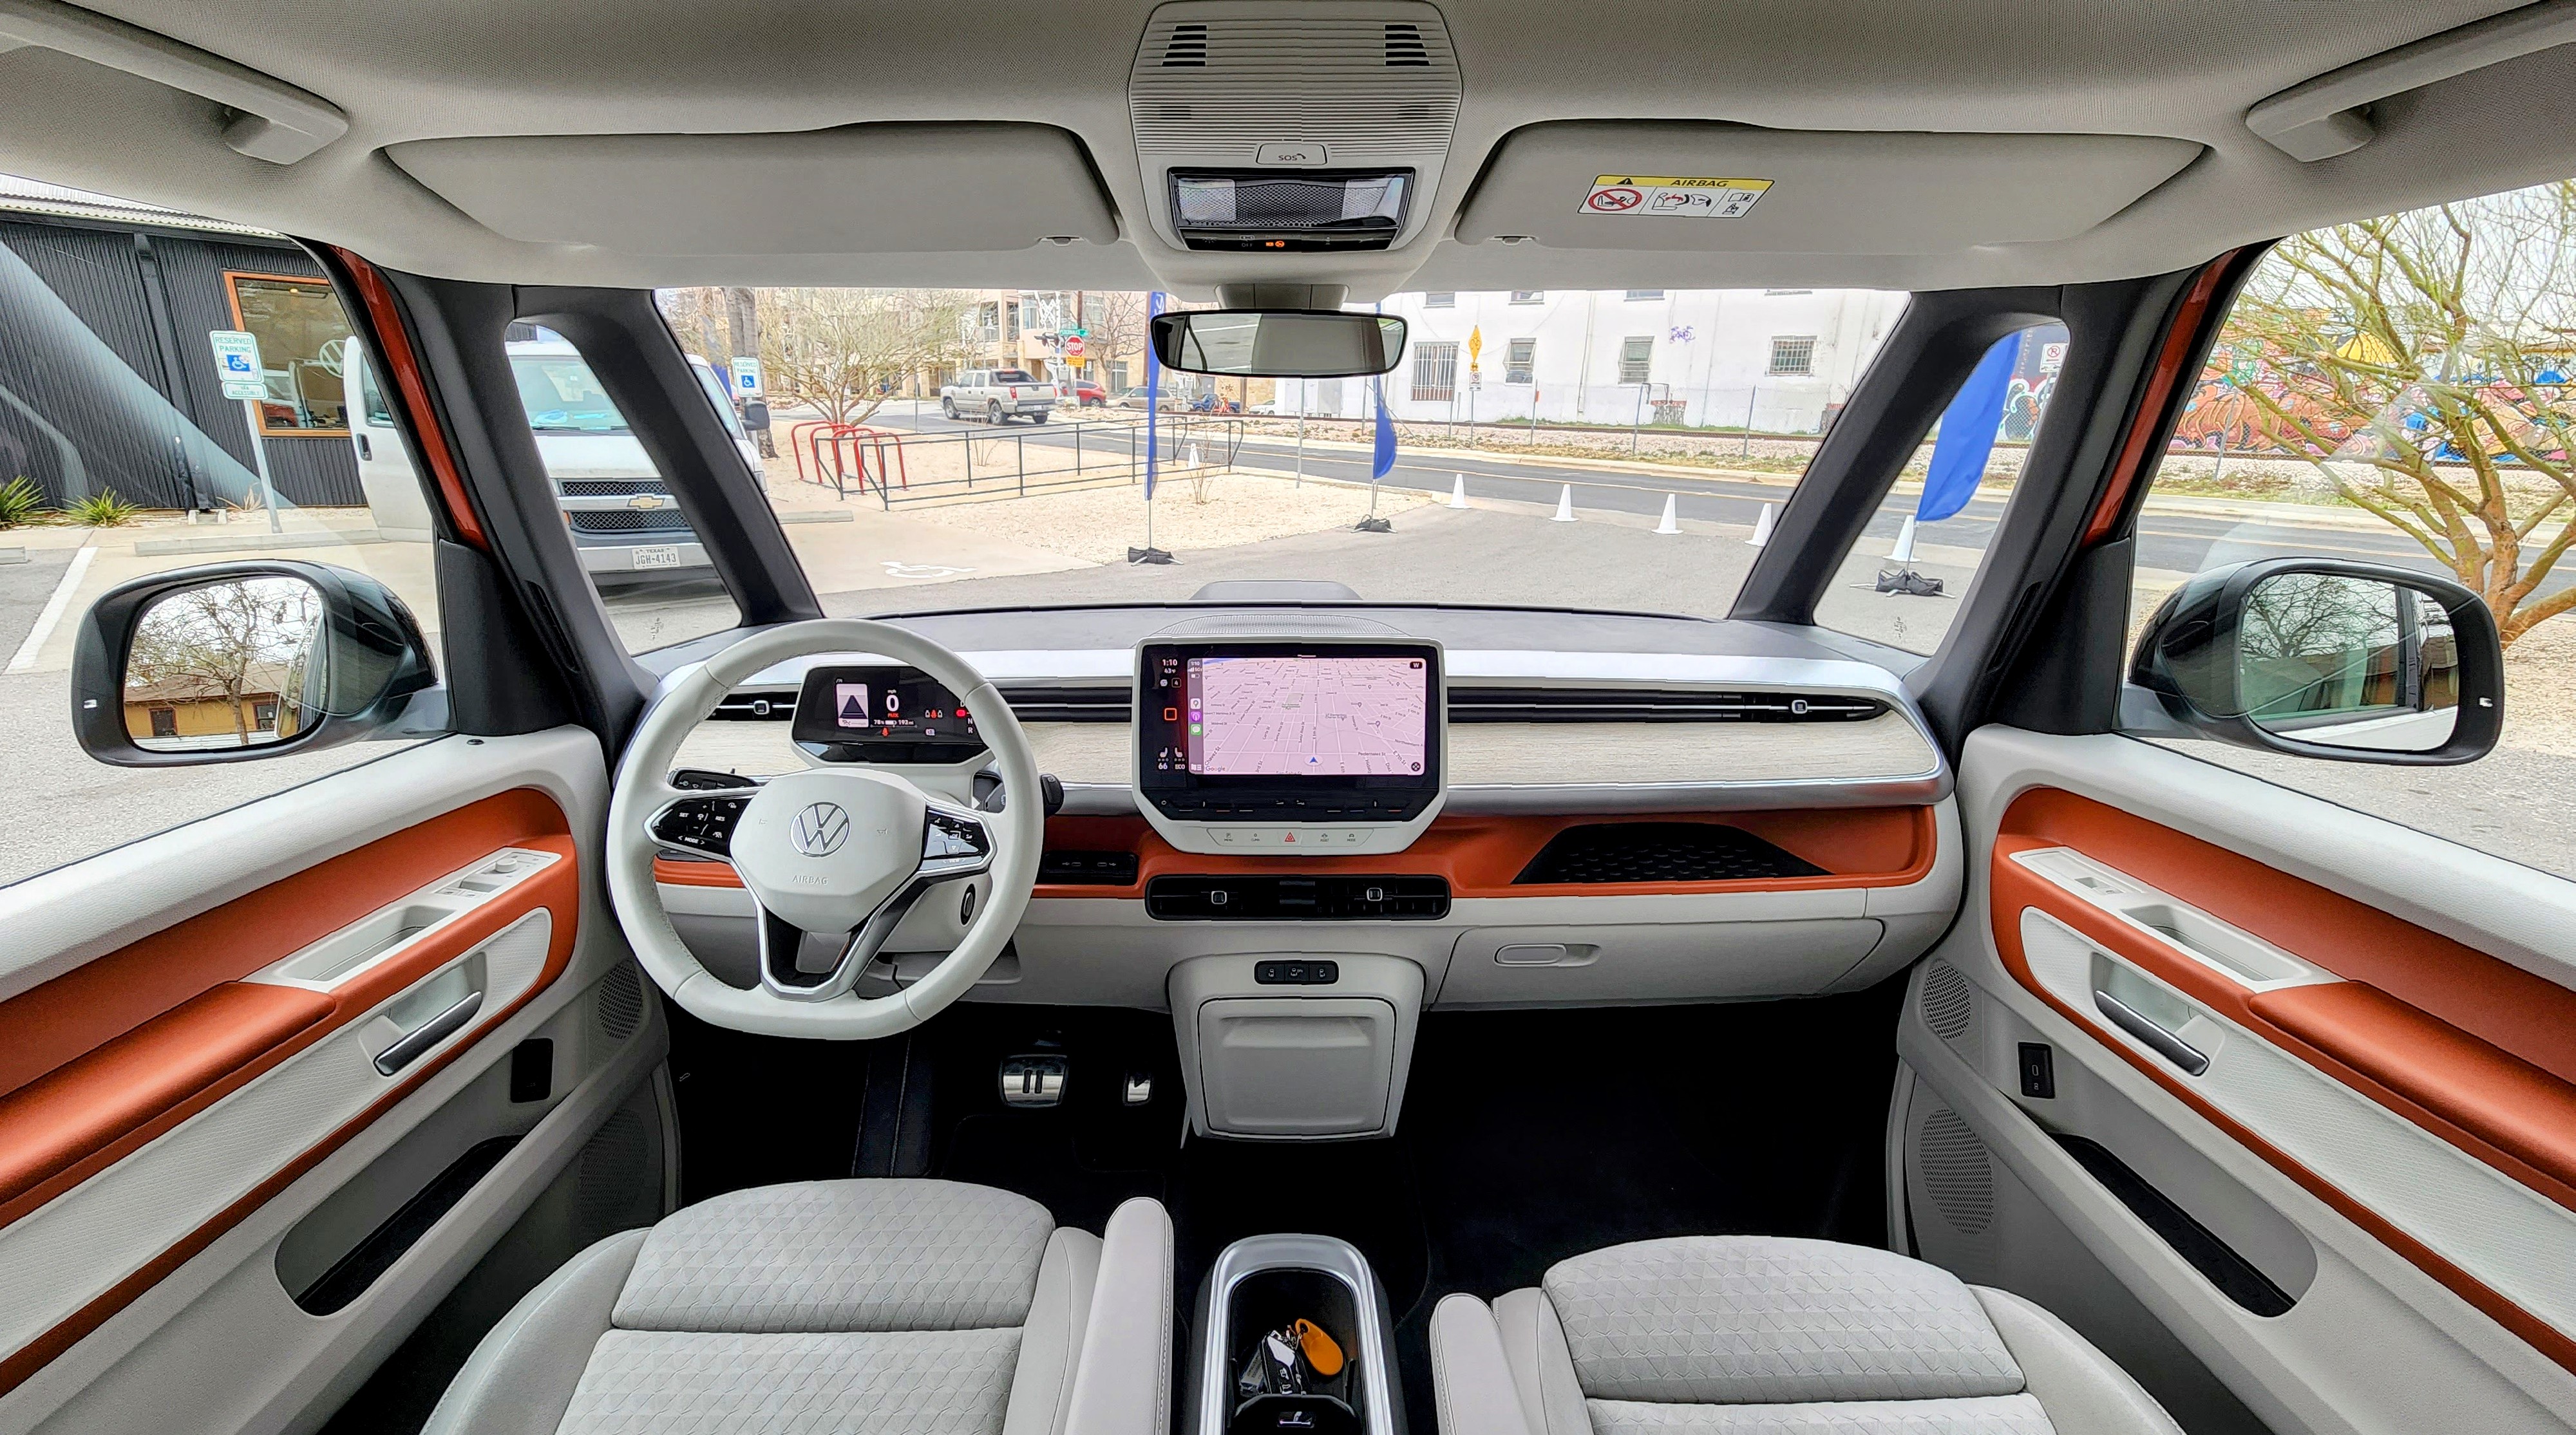 Full width view of the dash from the rear seats